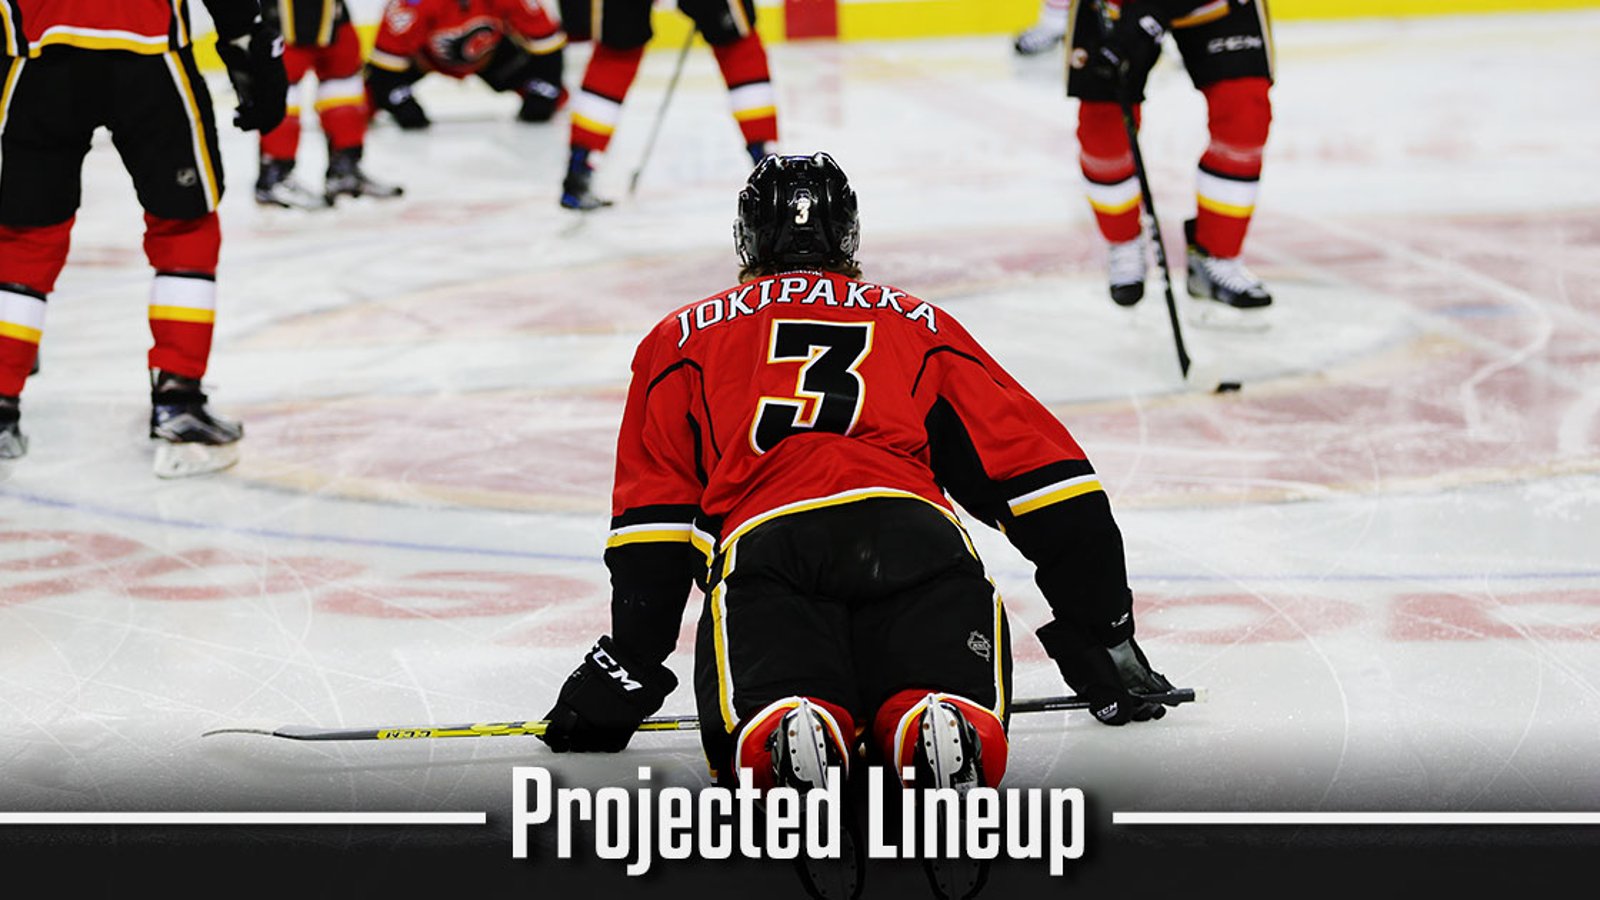 Projected Lineup: A few changes prior to the Battle of Alberta!